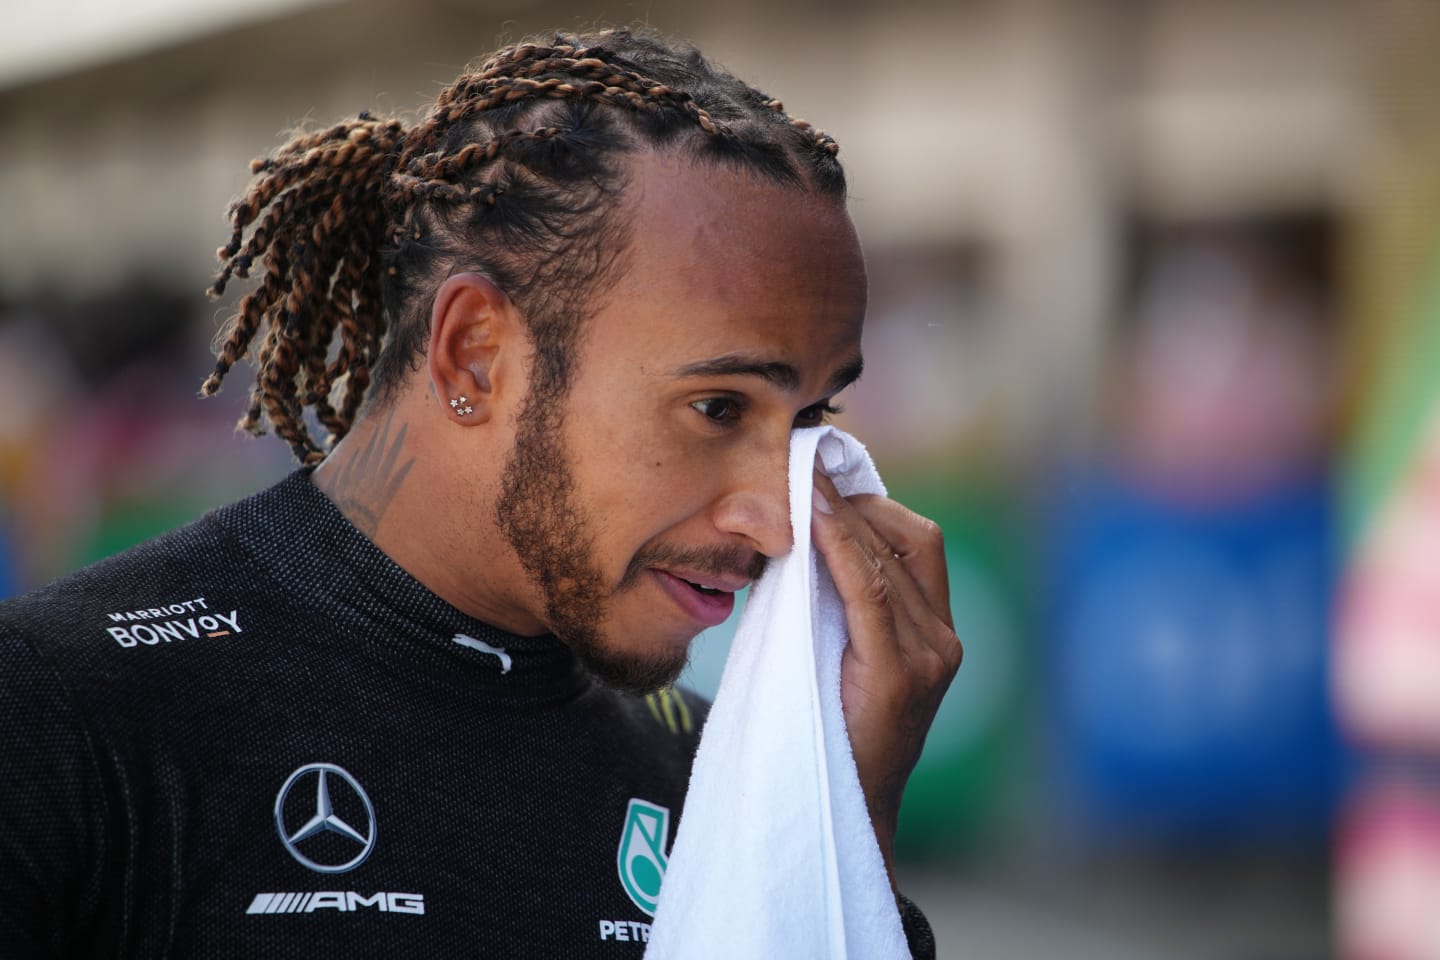 BARCELONA, SPAIN - MAY 08: Pole position qualifier Lewis Hamilton of Great Britain and Mercedes GP reacts in parc ferme during qualifying for the F1 Grand Prix of Spain at Circuit de Barcelona-Catalunya on May 08, 2021 in Barcelona, Spain. (Photo by Emilio Morenatti - Pool/Getty Images)